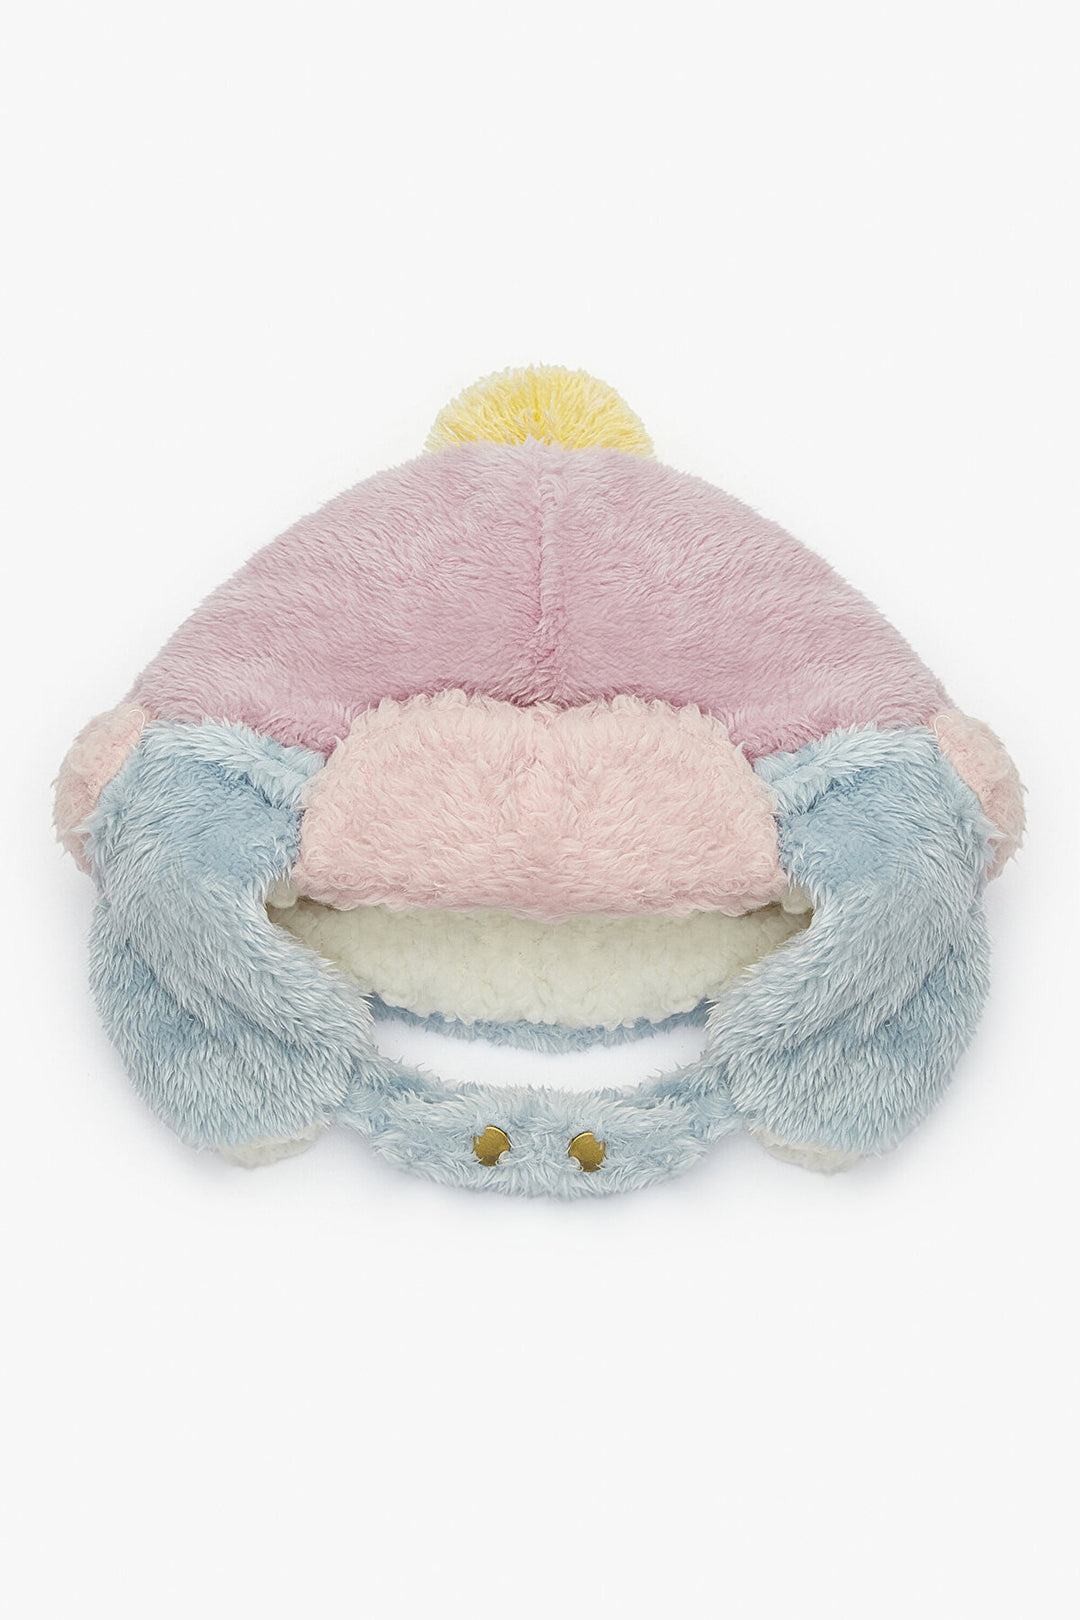 Girls Snow Colored Beret